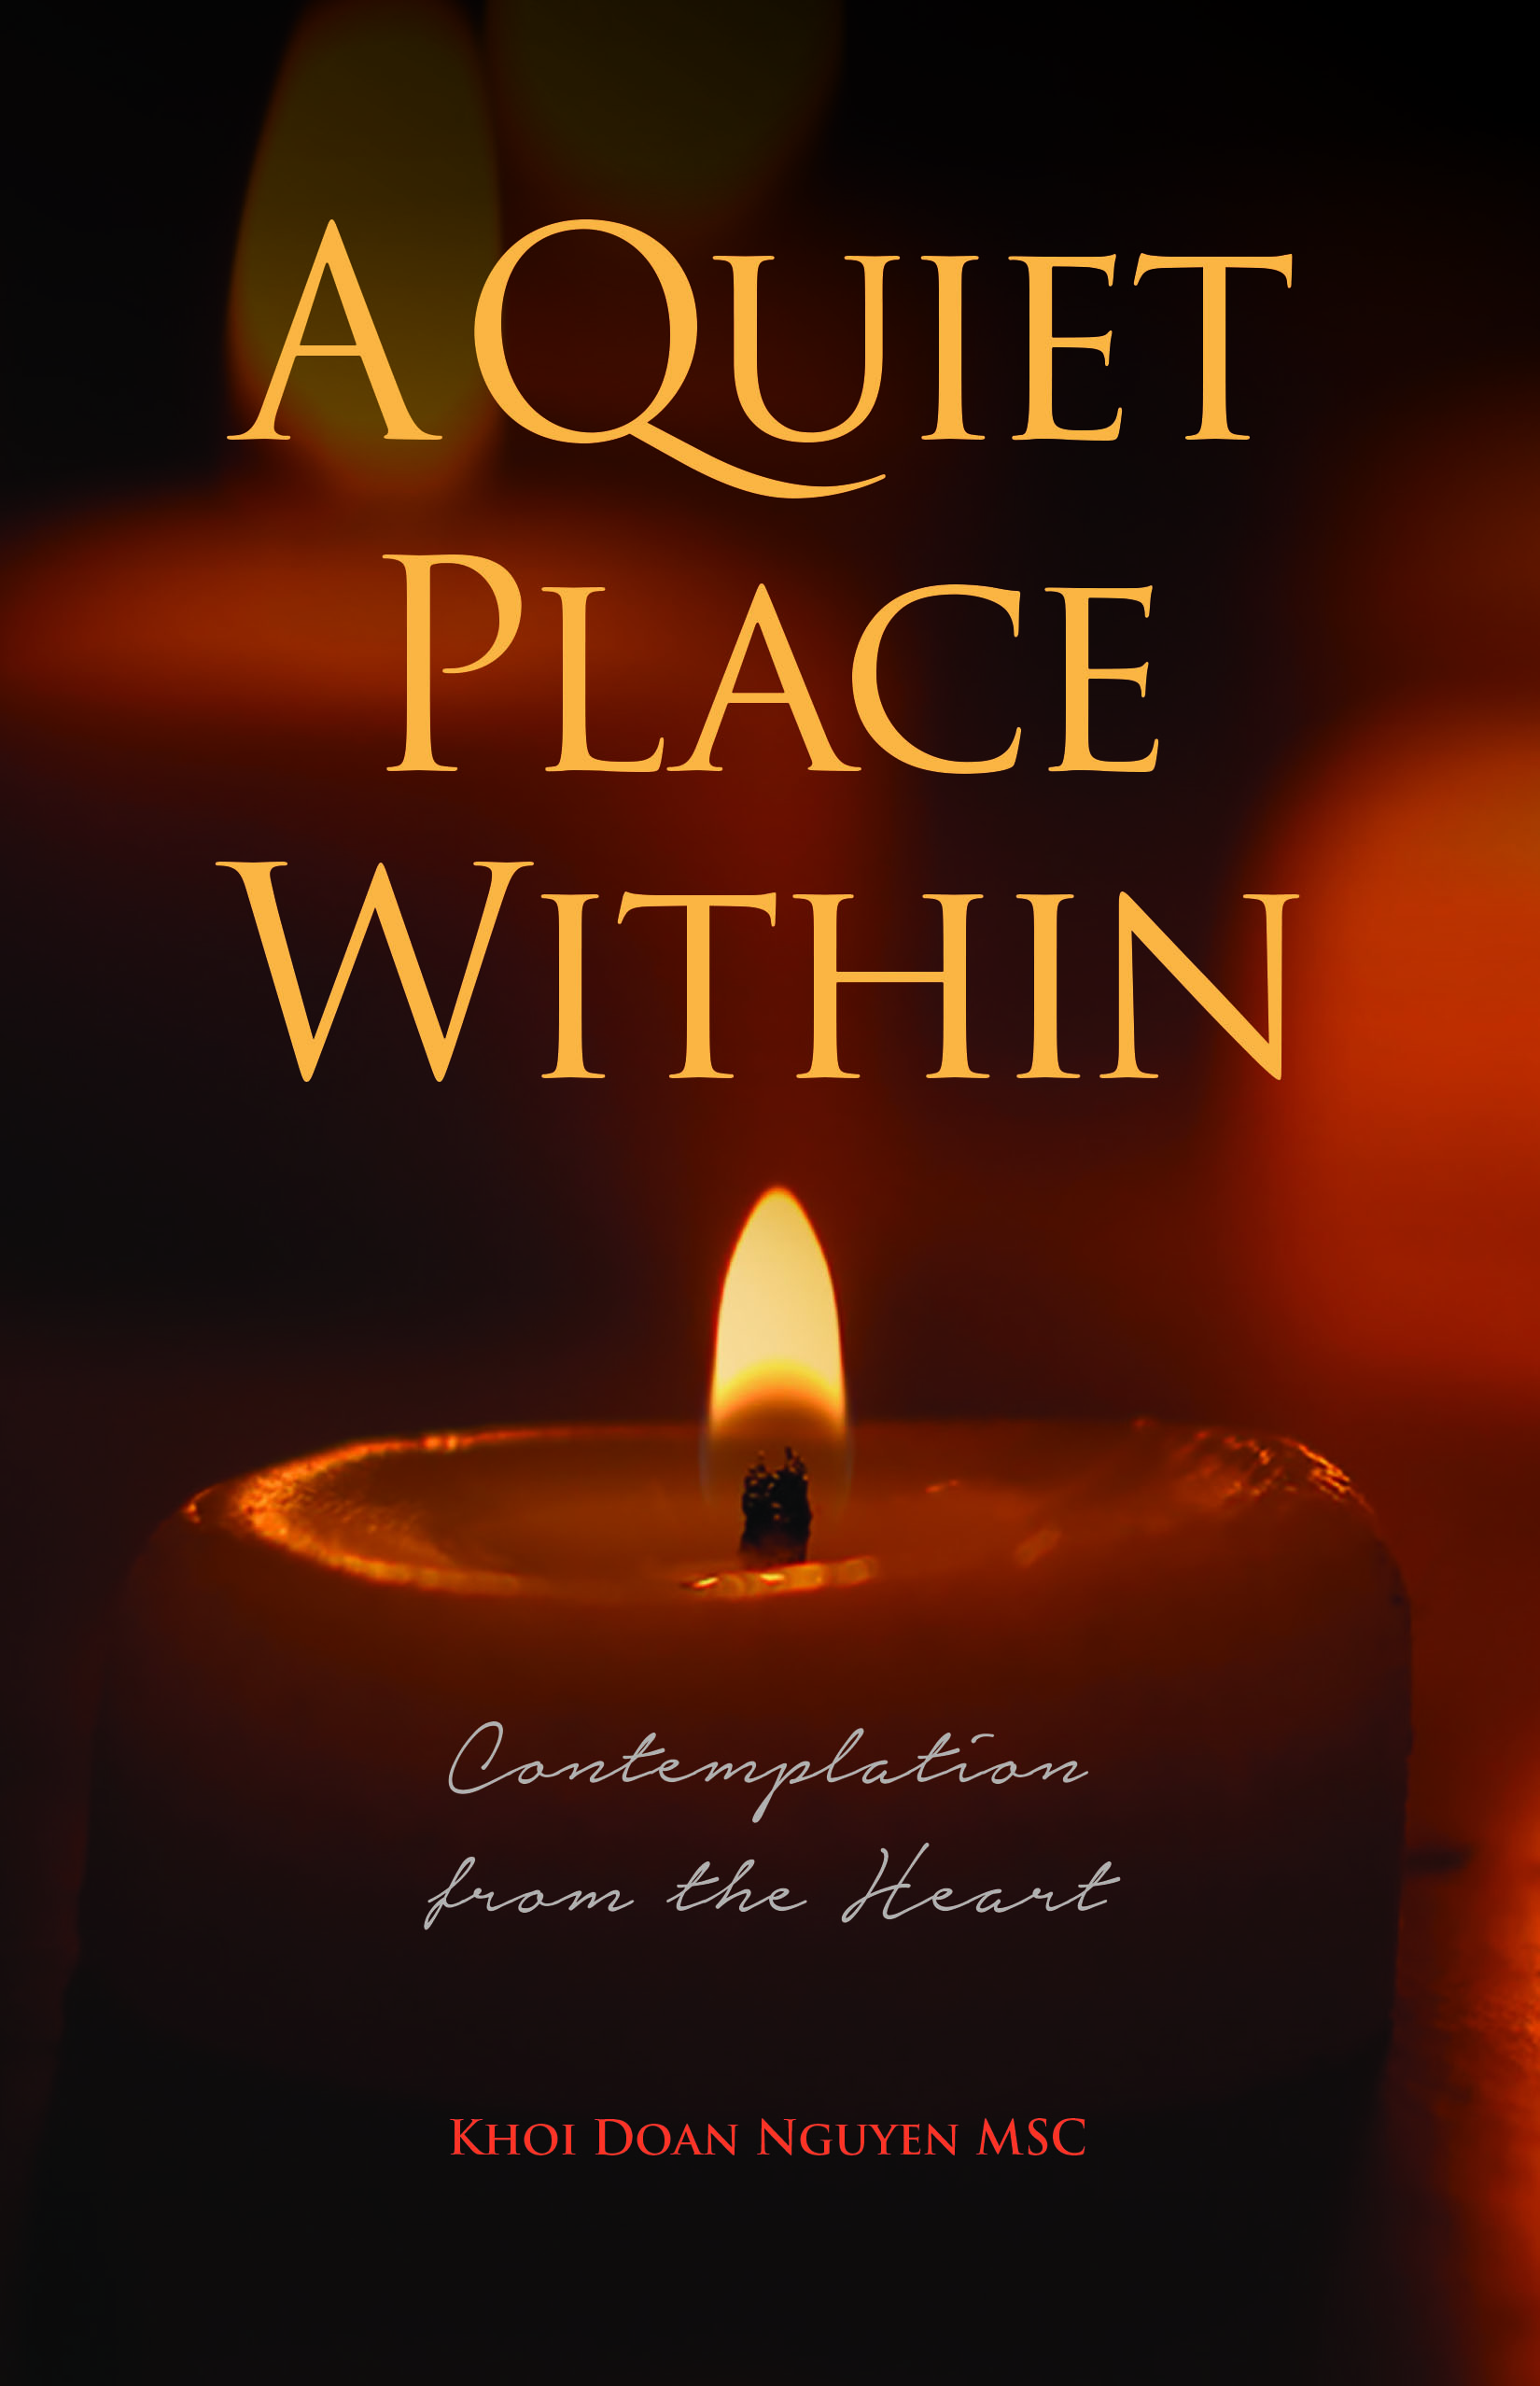 A Quiet Place Within  contemplation from the Heart / Khoi Doan Nguyen